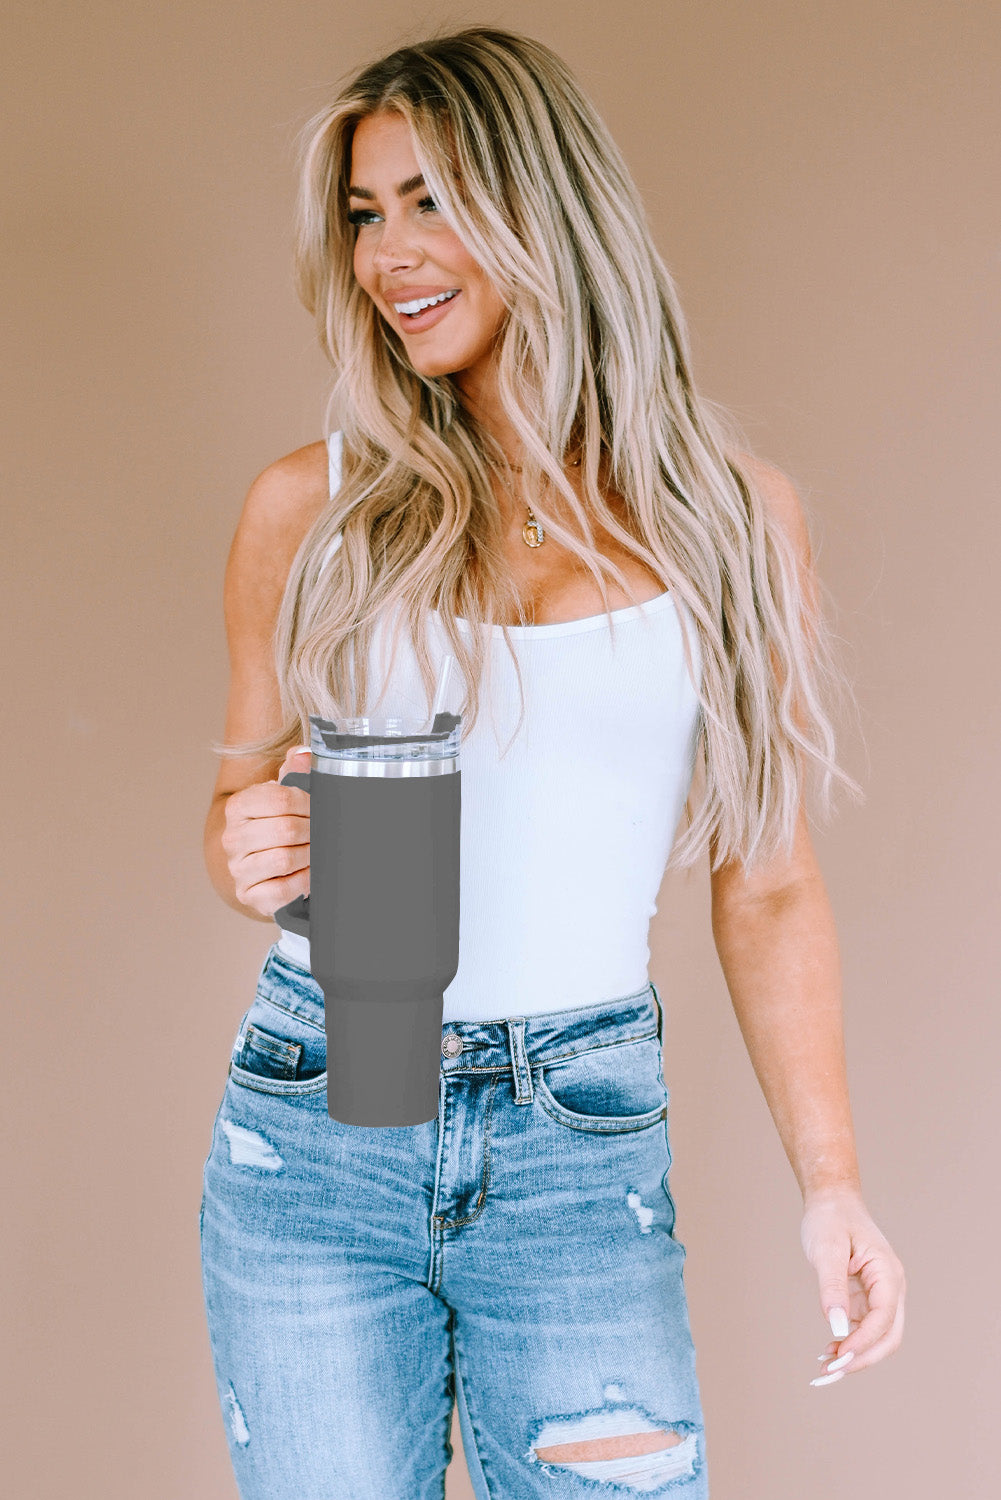 Gray 304 Stainless Steel Insulated Tumbler Mug With Straw